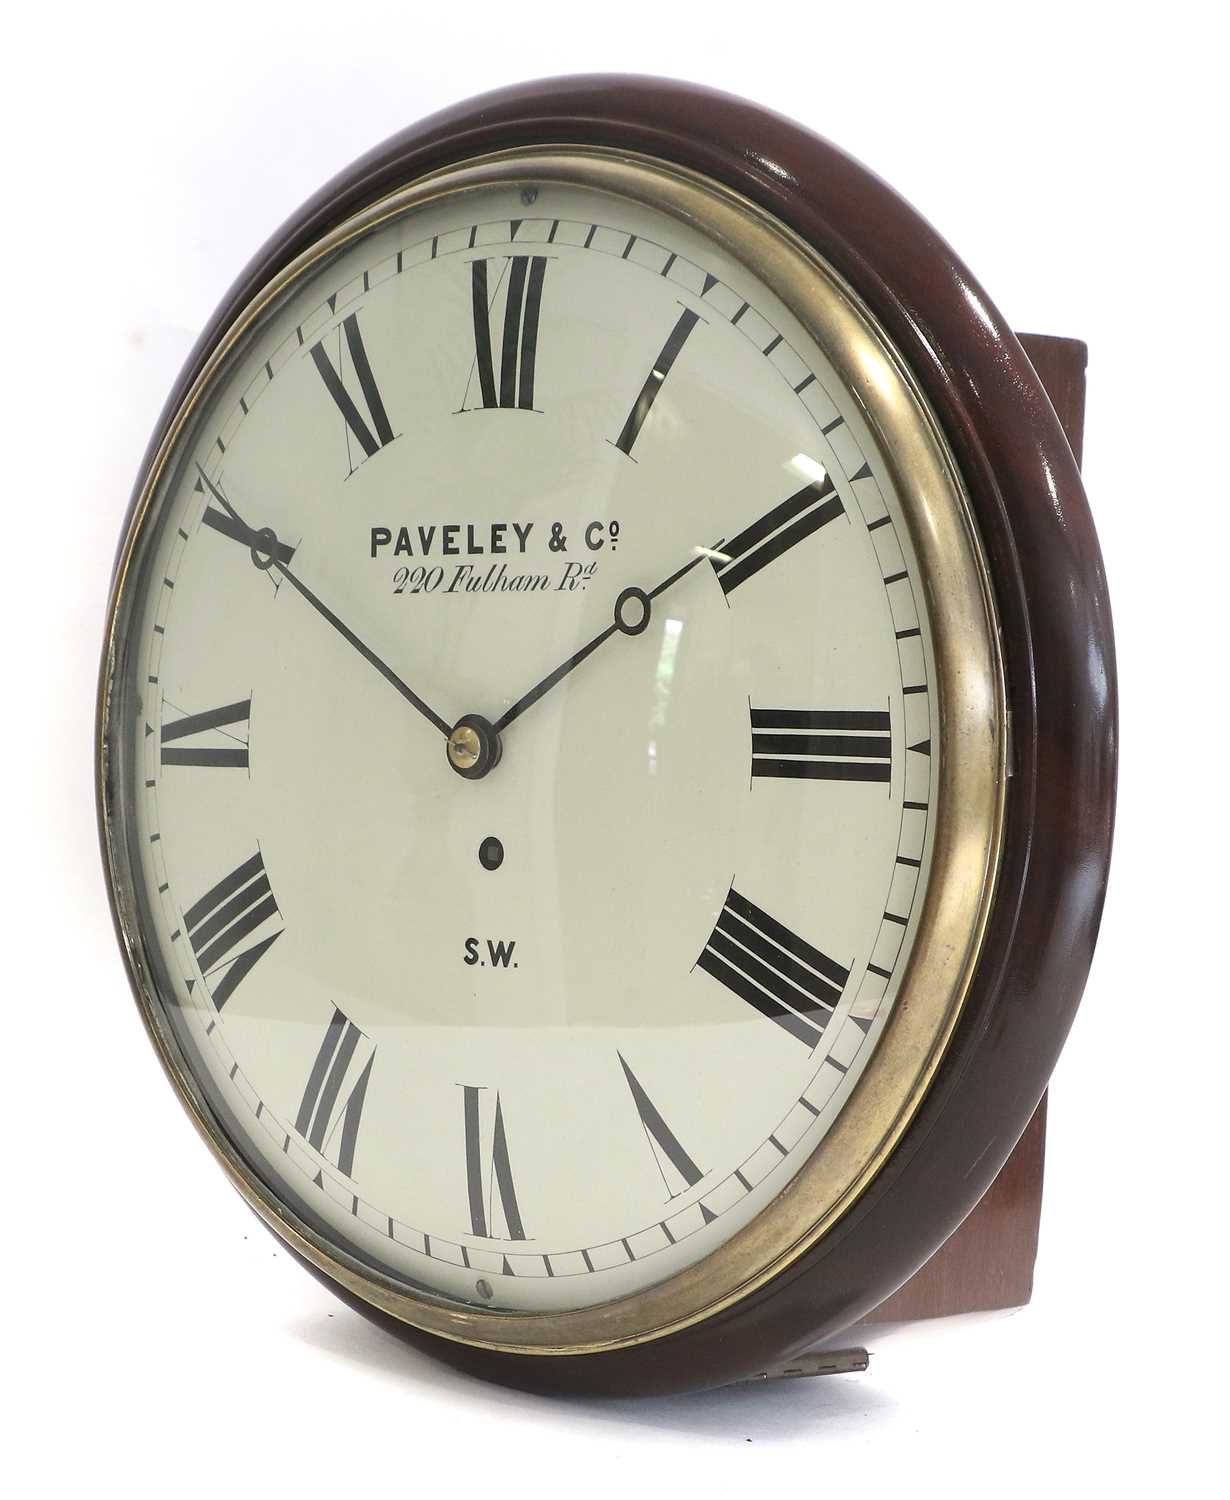 A Mahogany Wall Timepiece, signed Paveley & Co, 220 Fulham Rd, S.W, circa 1860, case with side and - Image 2 of 6